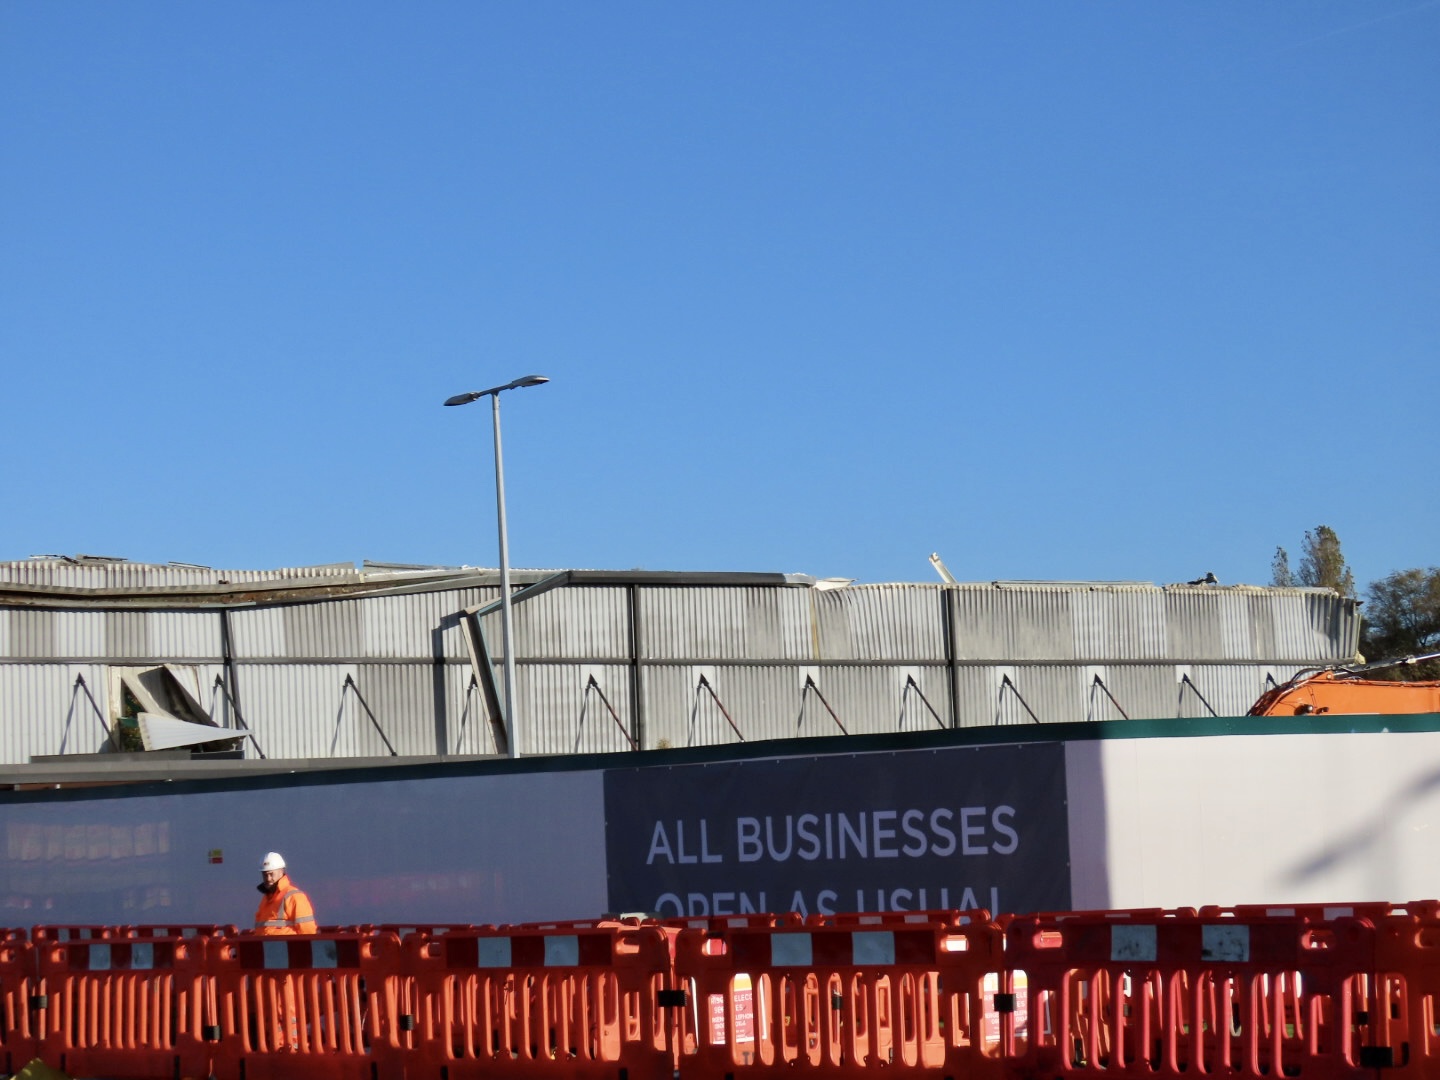 The former Homebase store at Meols Cop retail park is being demolished to make way for a new Sainsburys superstore. Photo by Andrew Brown Media